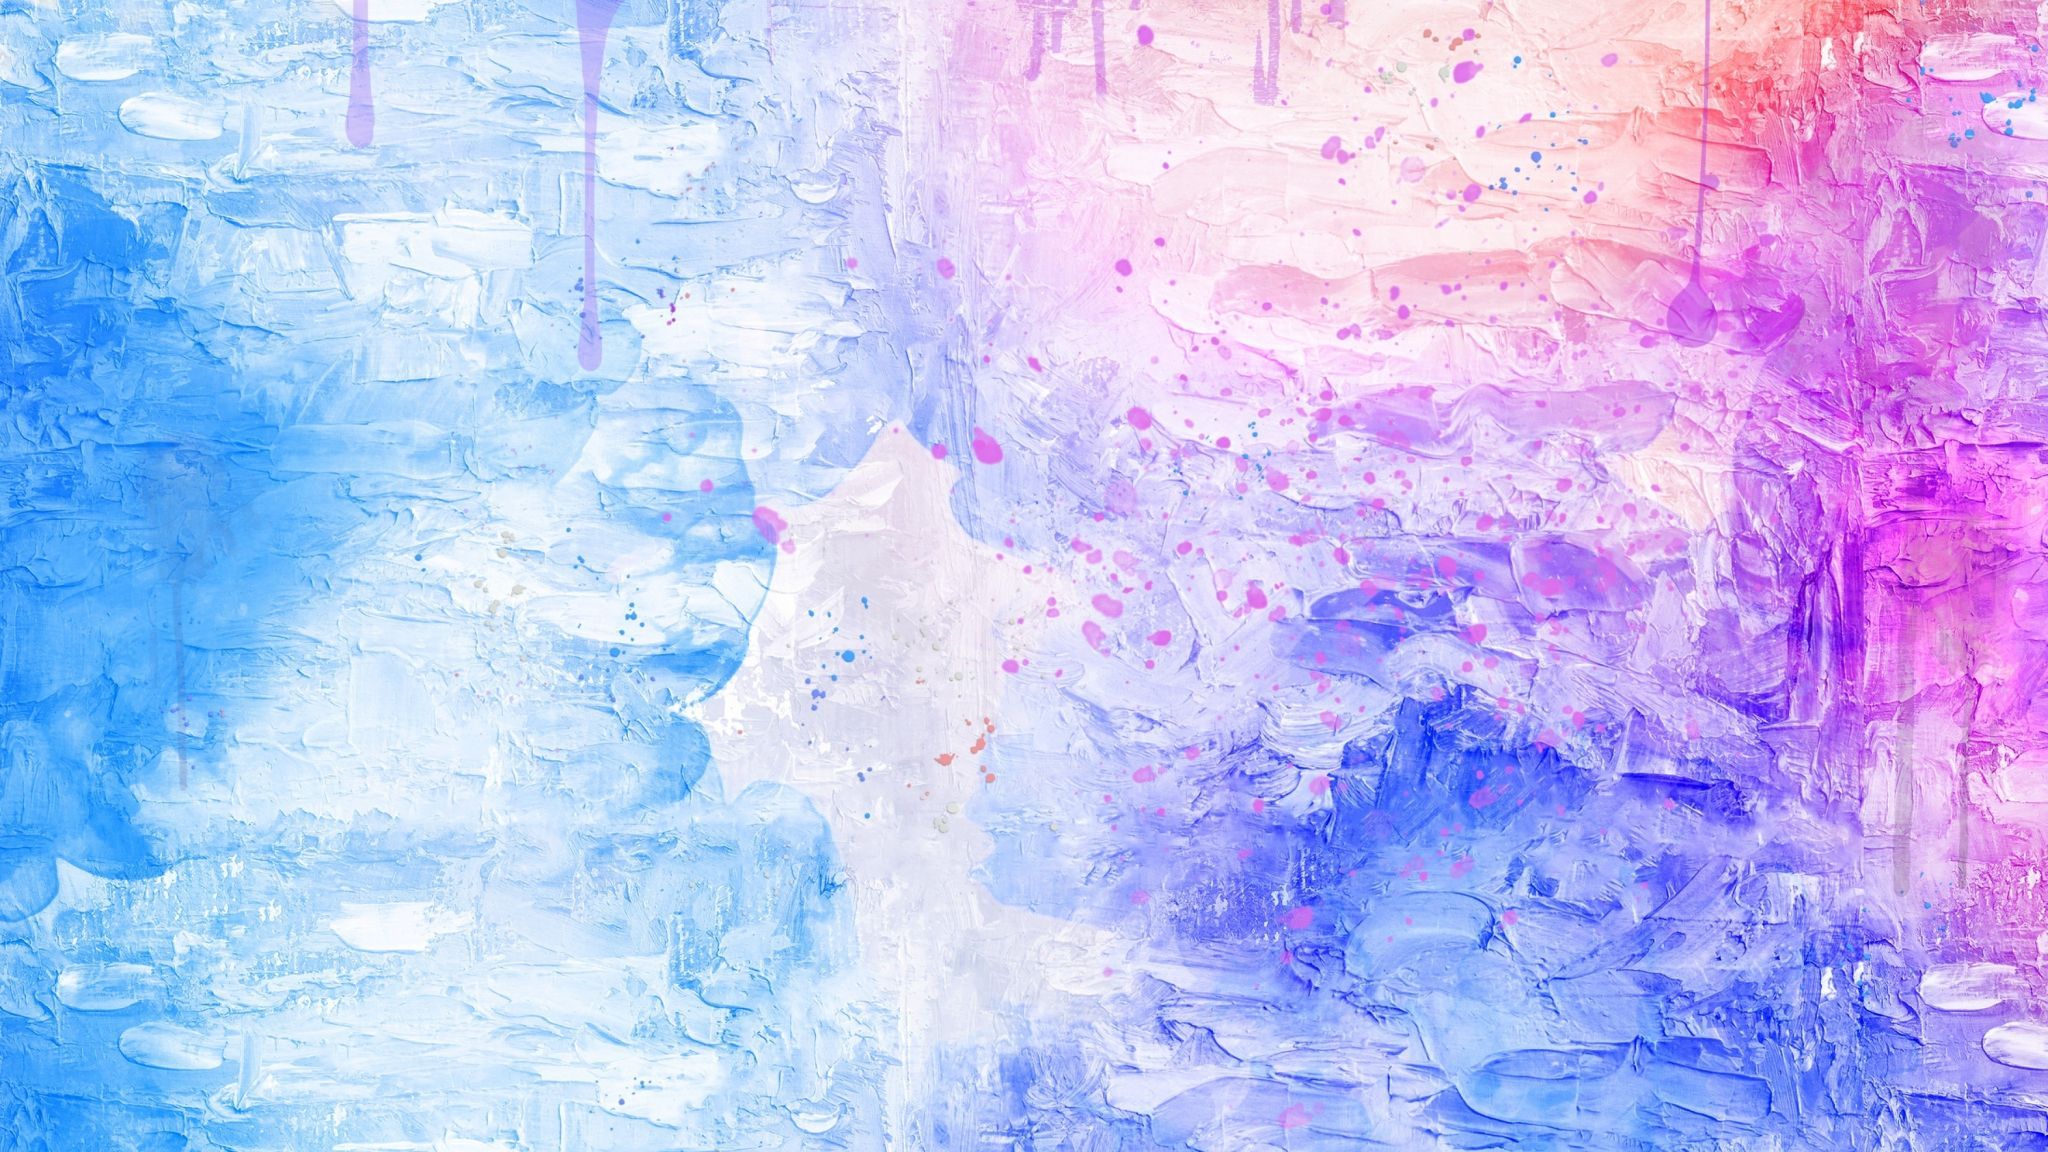 A close up of a painting with blue, purple and pink paint - 2048x1152